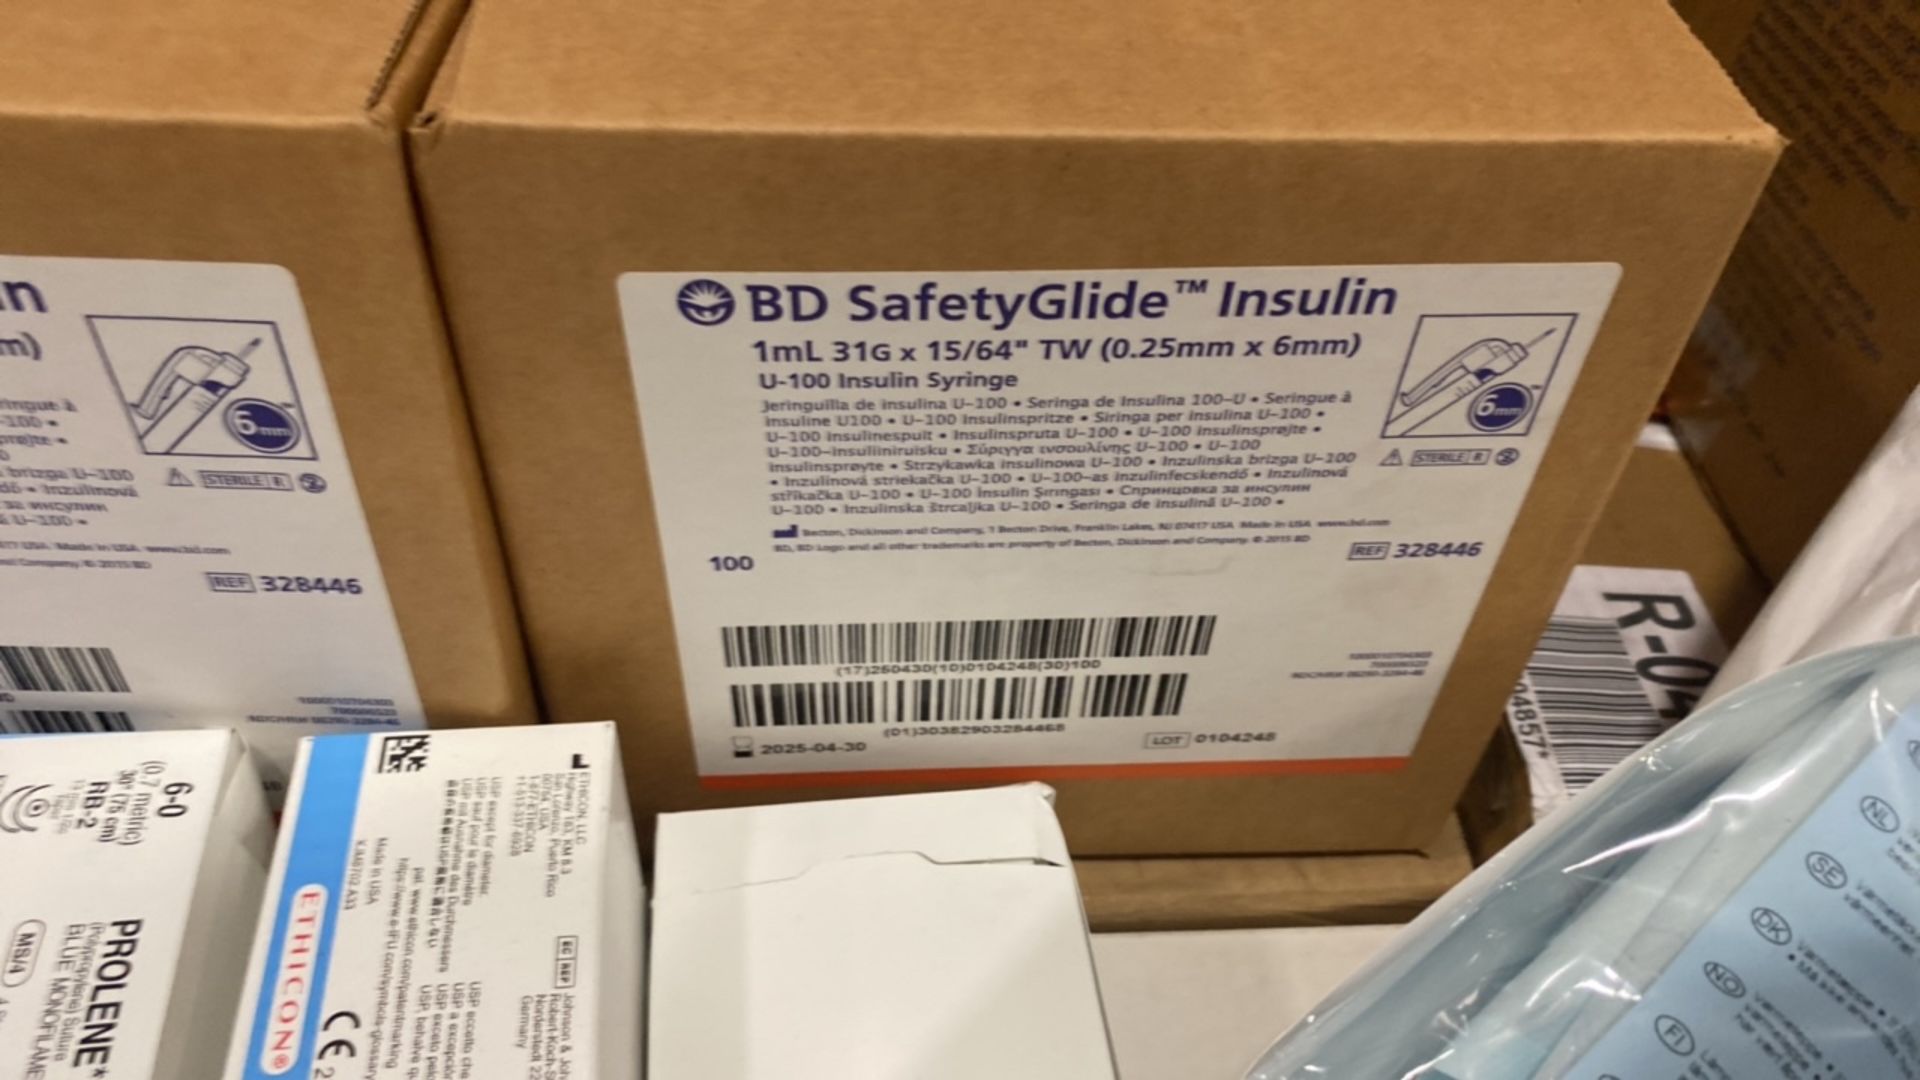 PALLET AND CONTENTS TO INCLUDE: 2 Boxes (200 indv.) of BD SafetyGlide Insulin U-100 Insulin - Image 3 of 4